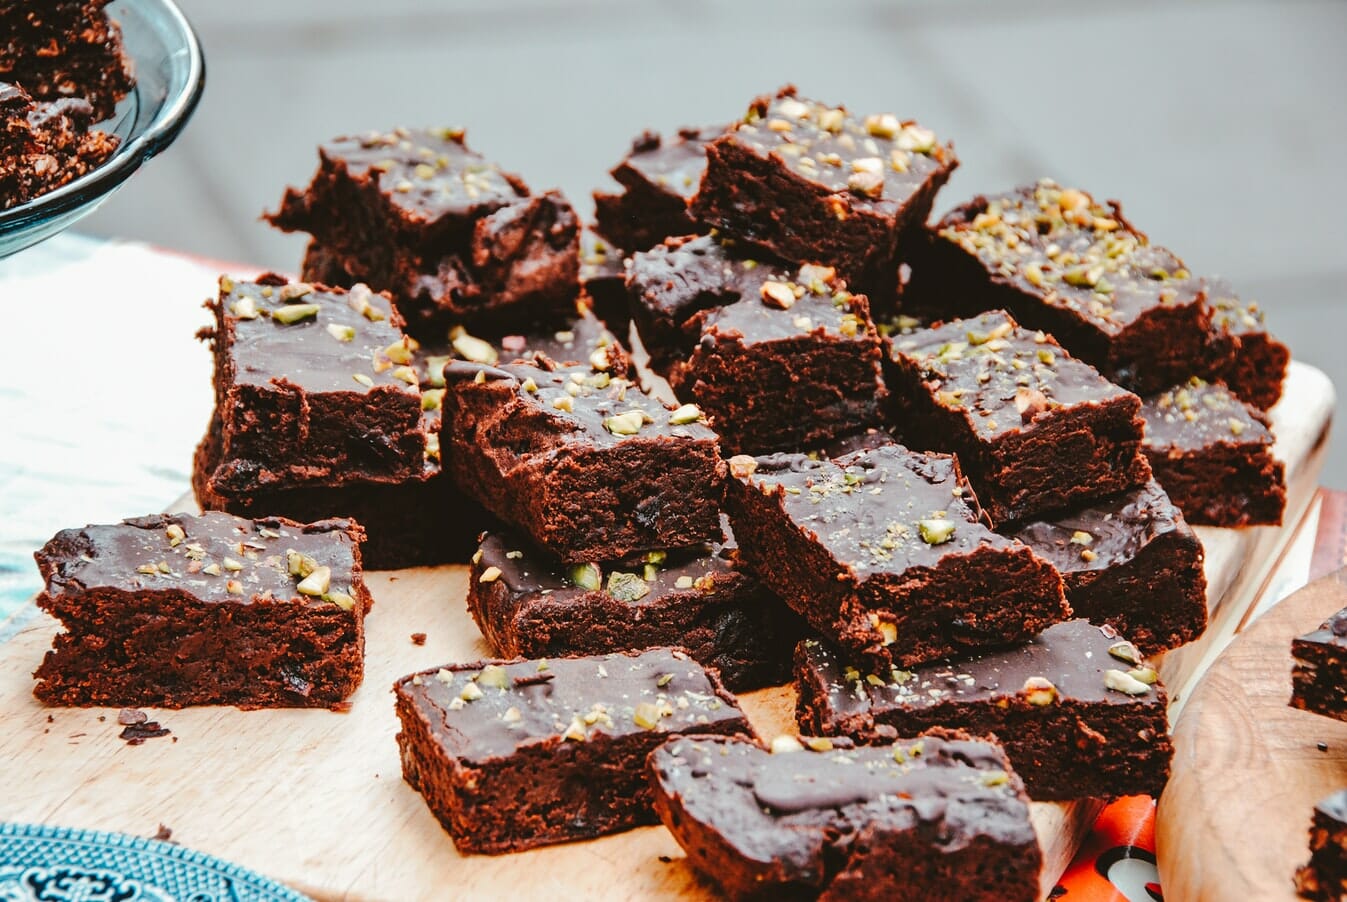 Chocolate brownies with pistachios on a wooden cutting board.